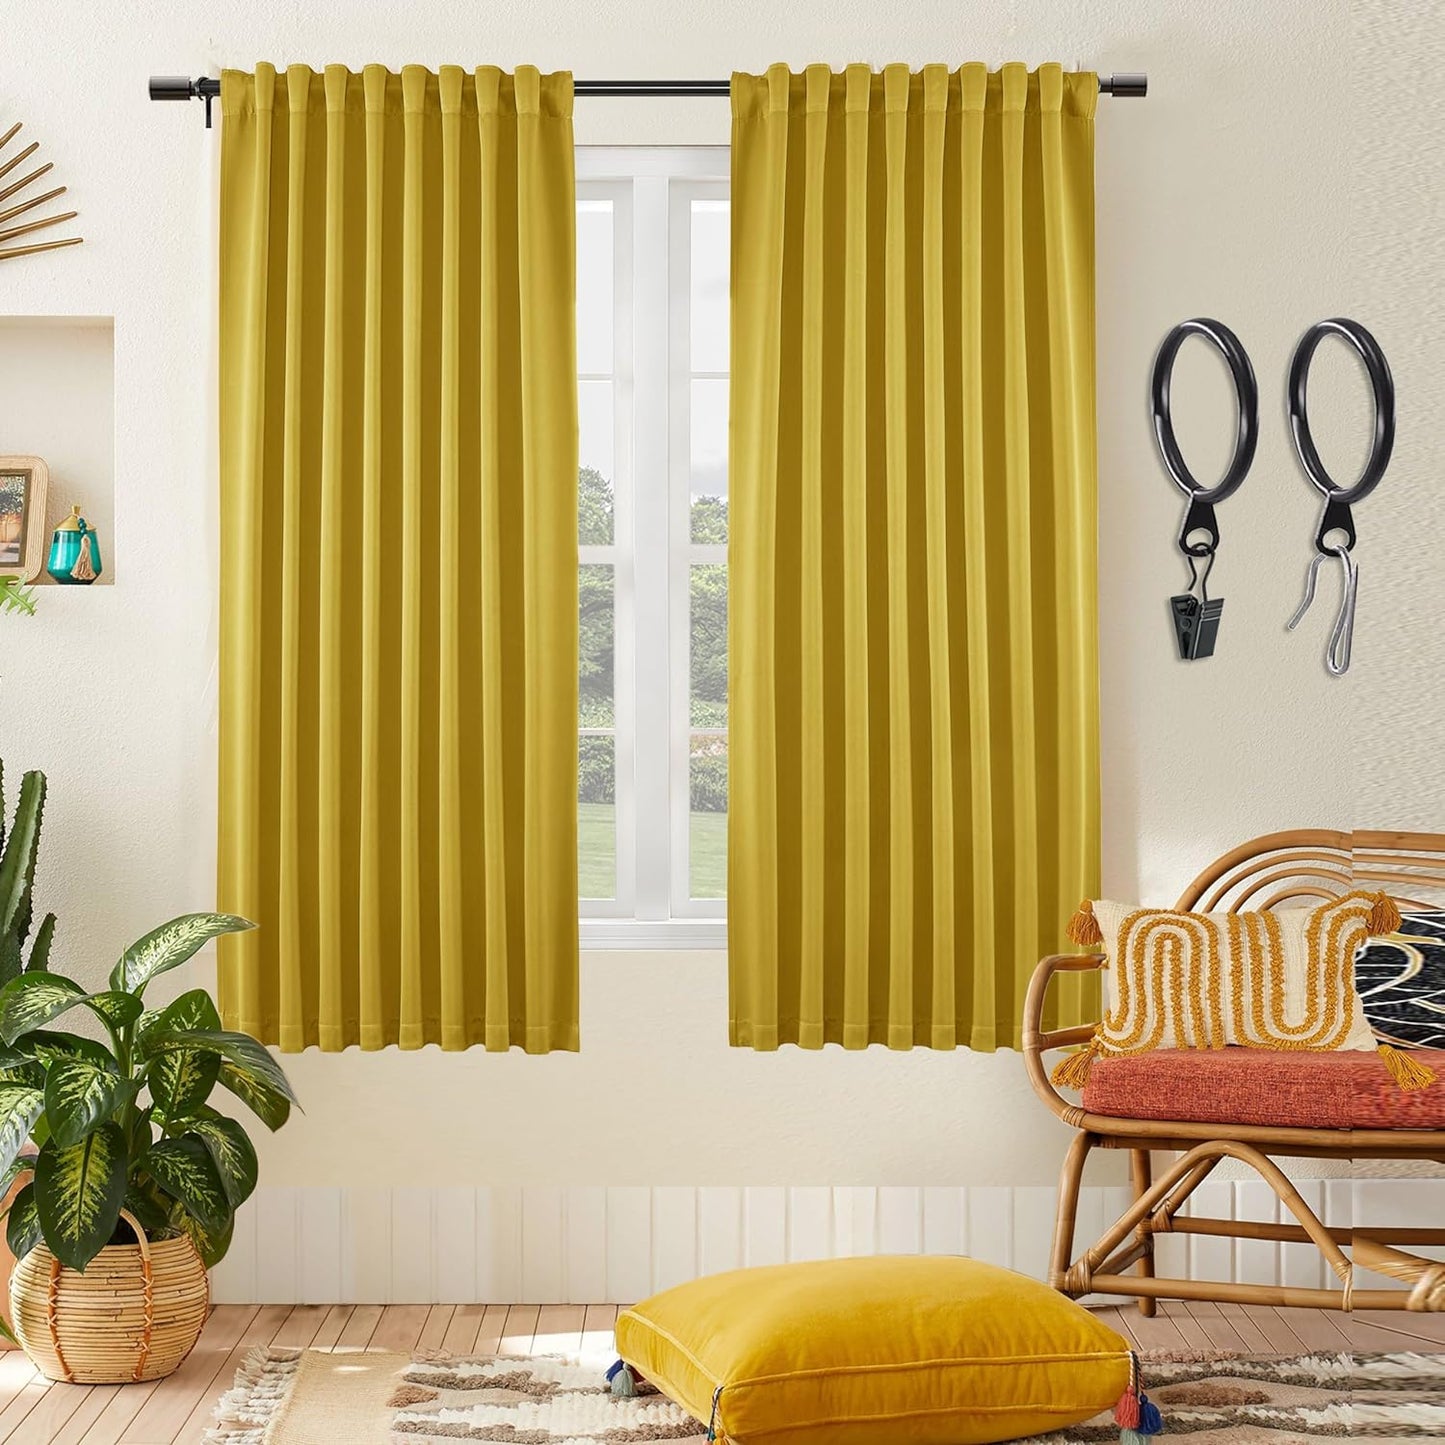 SHINELAND Beige Room Darkening Curtains 105 Inches Long for Living Room Bedroom,Cortinas Para Cuarto Bloqueador De Luz,Thermal Insulated Back Tab Pleat Blackout Curtains for Sunroom Patio Door Indoor  SHINELAND Mustard Yellow 2X(52"Wx63"L) 